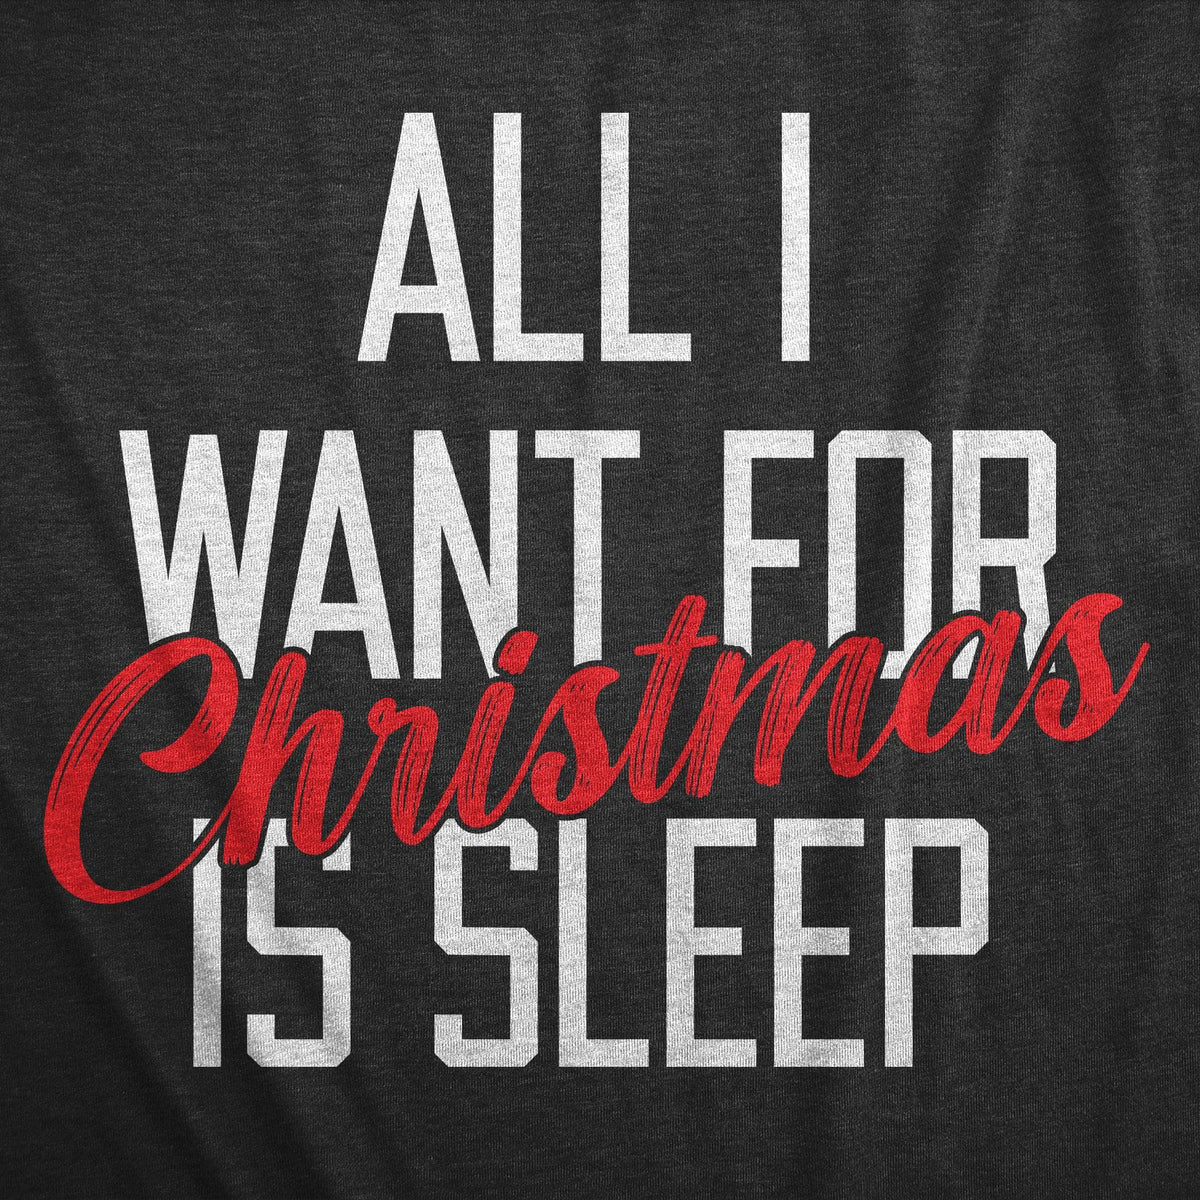 All I Want For Christmas Is Sleep Women&#39;s Tshirt  -  Crazy Dog T-Shirts